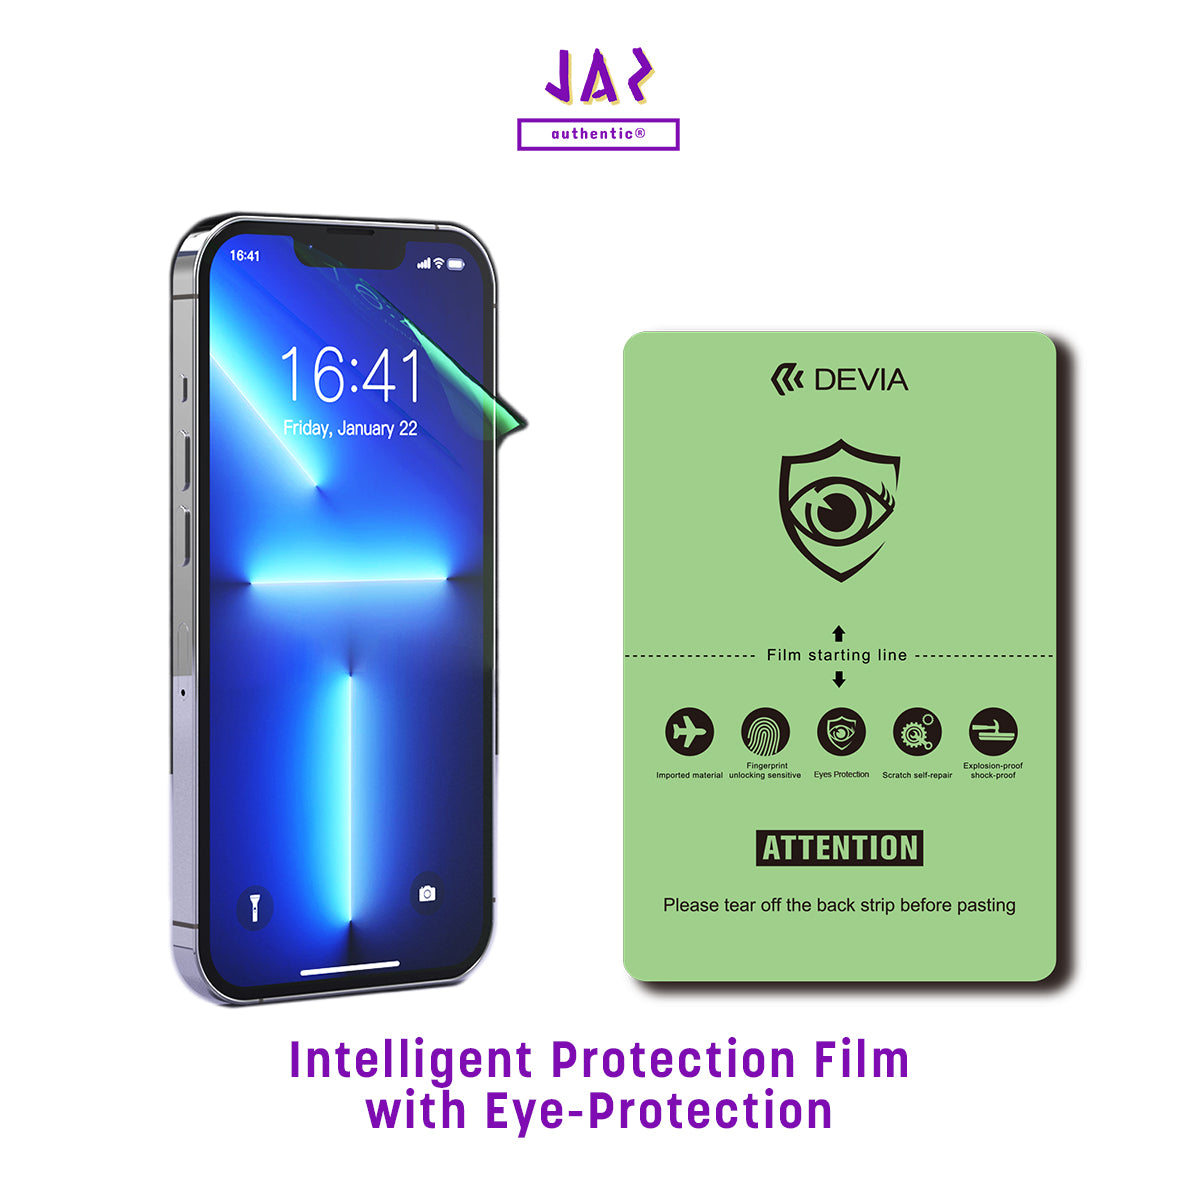 Devia Intelligent Green Ray Protective Front Film For Smartphone, Screen Protector Or Body Wrap, Clear